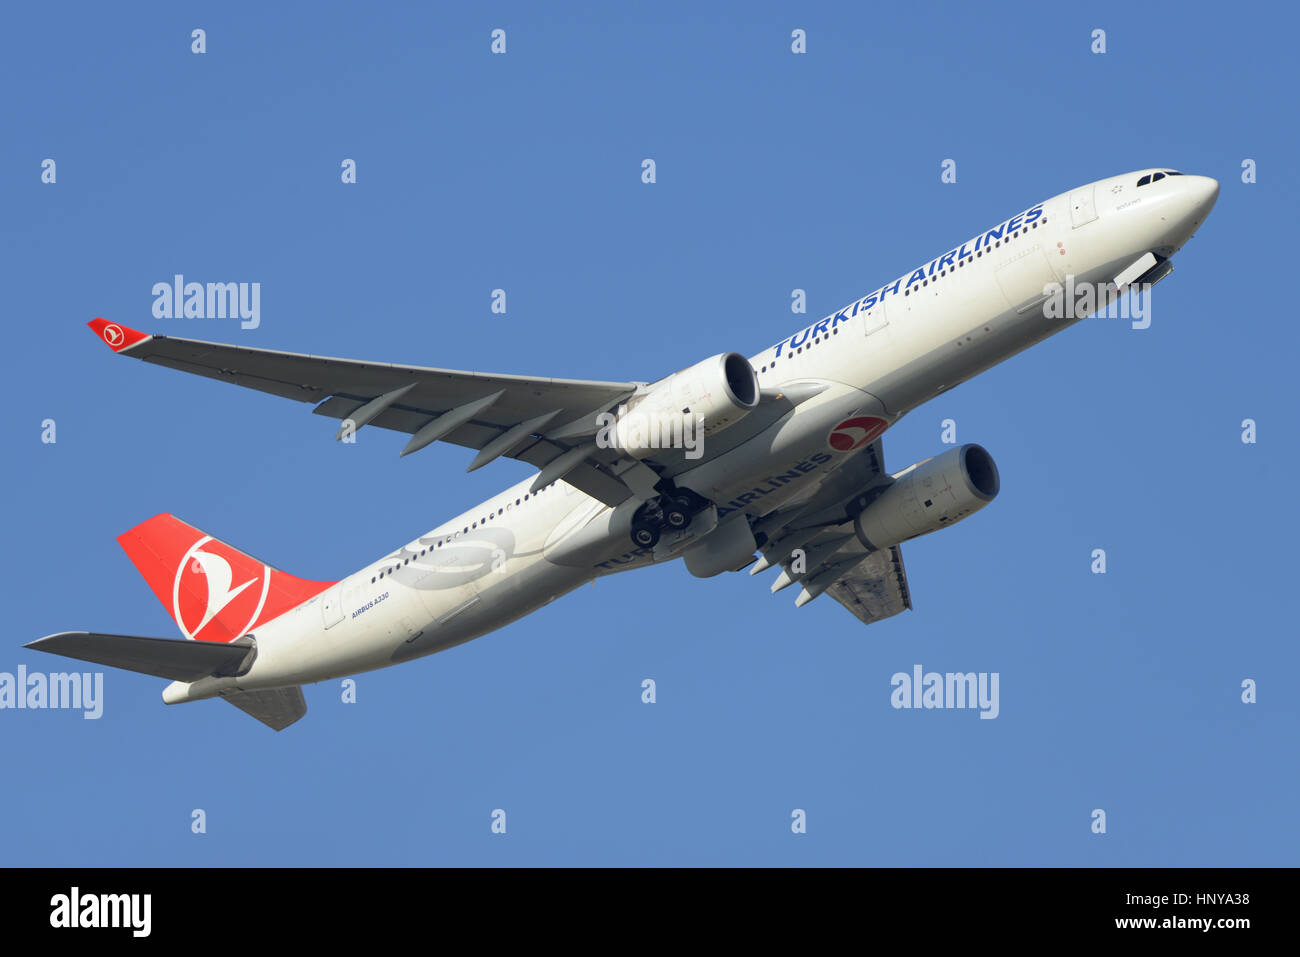 Turkish Airlines Airbus A330-343 TC-JNO 'Bogazici' taking off from London Heathrow Airport in blue sky Stock Photo